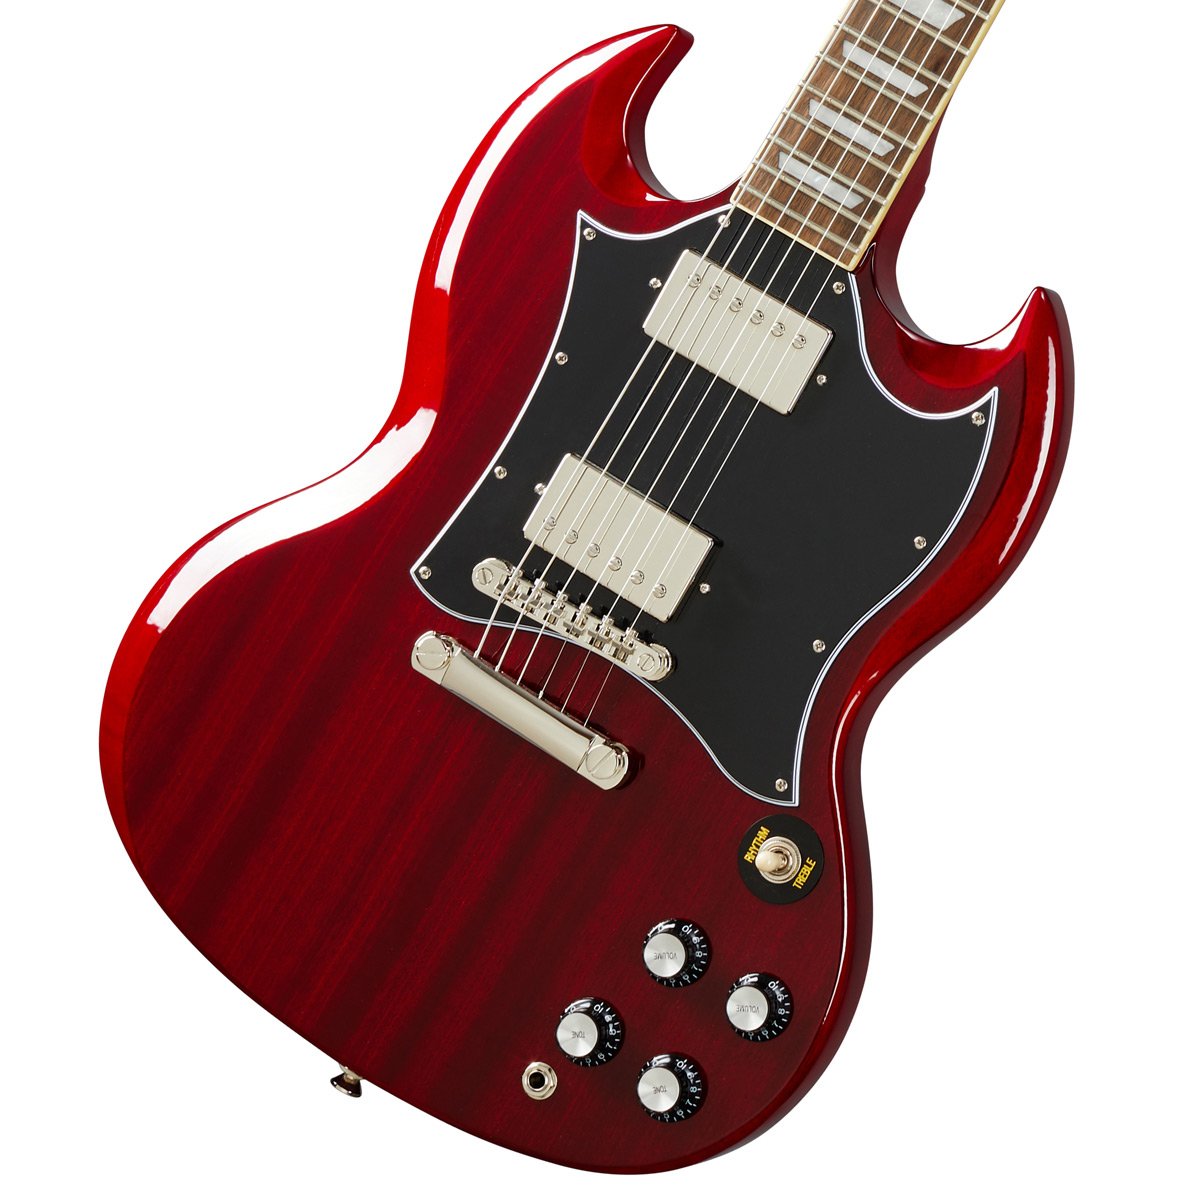 Epiphone Inspired by Gibson SG Standard Heritage Cherry エピフォン エレキギター  イシバシ楽器